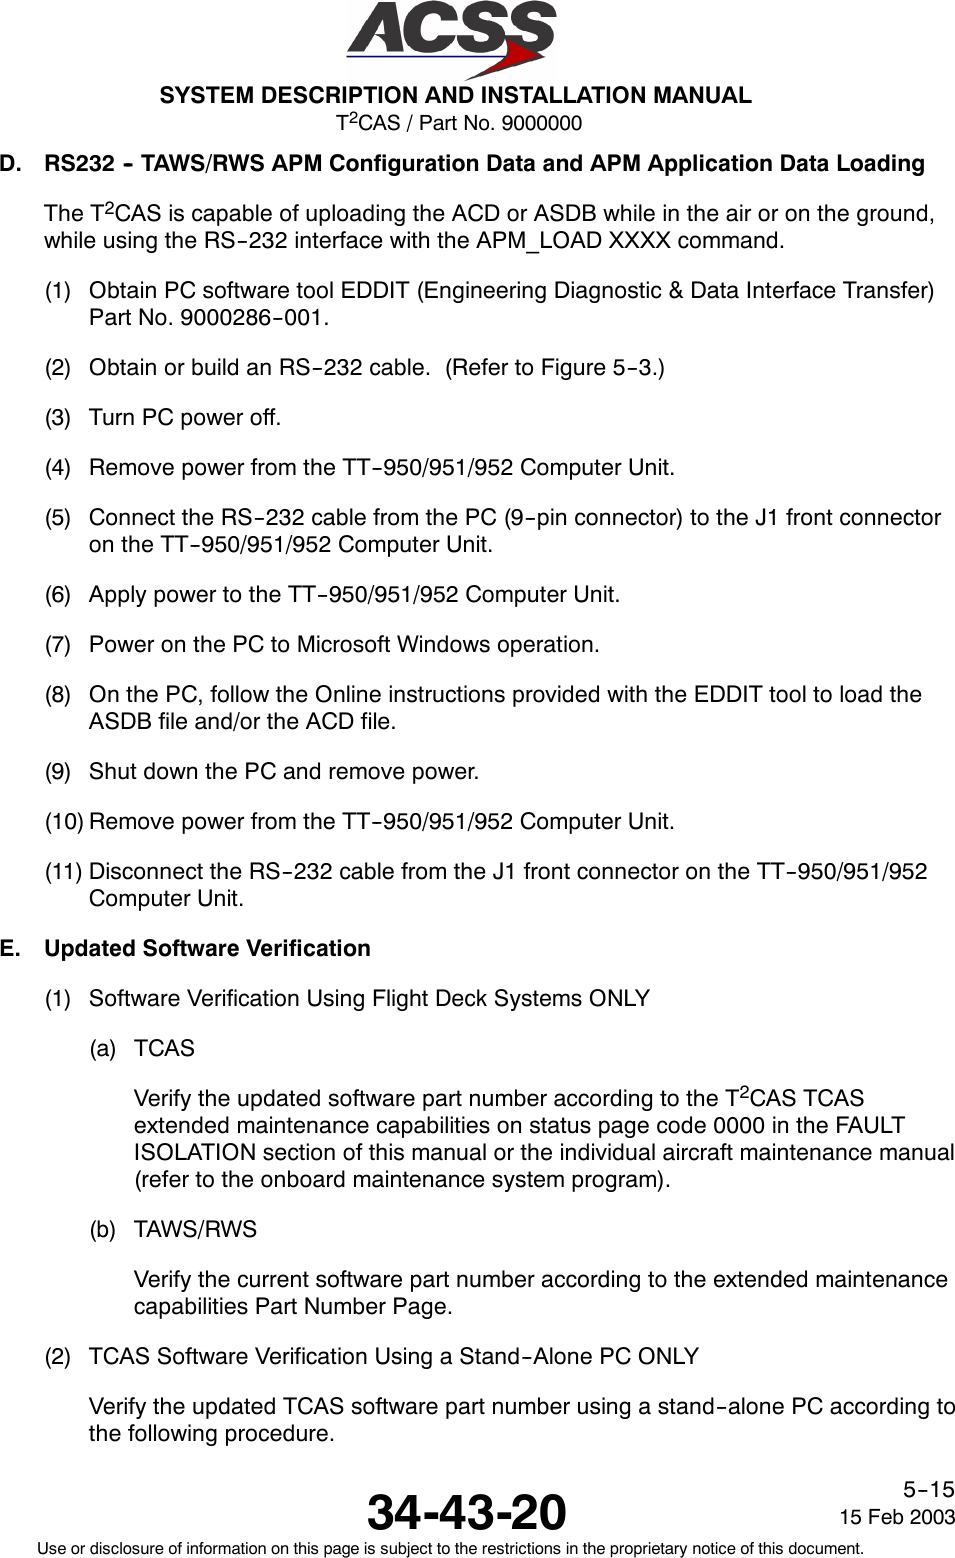 T2CAS / Part No. 9000000SYSTEM DESCRIPTION AND INSTALLATION MANUAL34-43-20 15 Feb 2003Use or disclosure of information on this page is subject to the restrictions in the proprietary notice of this document.5--15D. RS232 -- TAWS/RWS APM Configuration Data and APM Application Data LoadingThe T2CAS is capable of uploading the ACD or ASDB while in the air or on the ground,while using the RS--232 interface with the APM_LOAD XXXX command.(1) Obtain PC software tool EDDIT (Engineering Diagnostic &amp; Data Interface Transfer)Part No. 9000286--001.(2) Obtain or build an RS--232 cable. (Refer to Figure 5--3.)(3) Turn PC power off.(4) Remove power from the TT--950/951/952 Computer Unit.(5) Connect the RS--232 cable from the PC (9--pin connector) to the J1 front connectoron the TT--950/951/952 Computer Unit.(6) Apply power to the TT--950/951/952 Computer Unit.(7) Power on the PC to Microsoft Windows operation.(8) On the PC, follow the Online instructions provided with the EDDIT tool to load theASDB file and/or the ACD file.(9) Shut down the PC and remove power.(10) Remove power from the TT--950/951/952 Computer Unit.(11) Disconnect the RS--232 cable from the J1 front connector on the TT--950/951/952Computer Unit.E. Updated Software Verification(1) Software Verification Using Flight Deck Systems ONLY(a) TCASVerify the updated software part number according to the T2CAS TCASextended maintenance capabilities on status page code 0000 in the FAULTISOLATION section of this manual or the individual aircraft maintenance manual(refer to the onboard maintenance system program).(b) TAWS/RWSVerify the current software part number according to the extended maintenancecapabilities Part Number Page.(2) TCAS Software Verification Using a Stand--Alone PC ONLYVerify the updated TCAS software part number using a stand--alone PC according tothe following procedure.